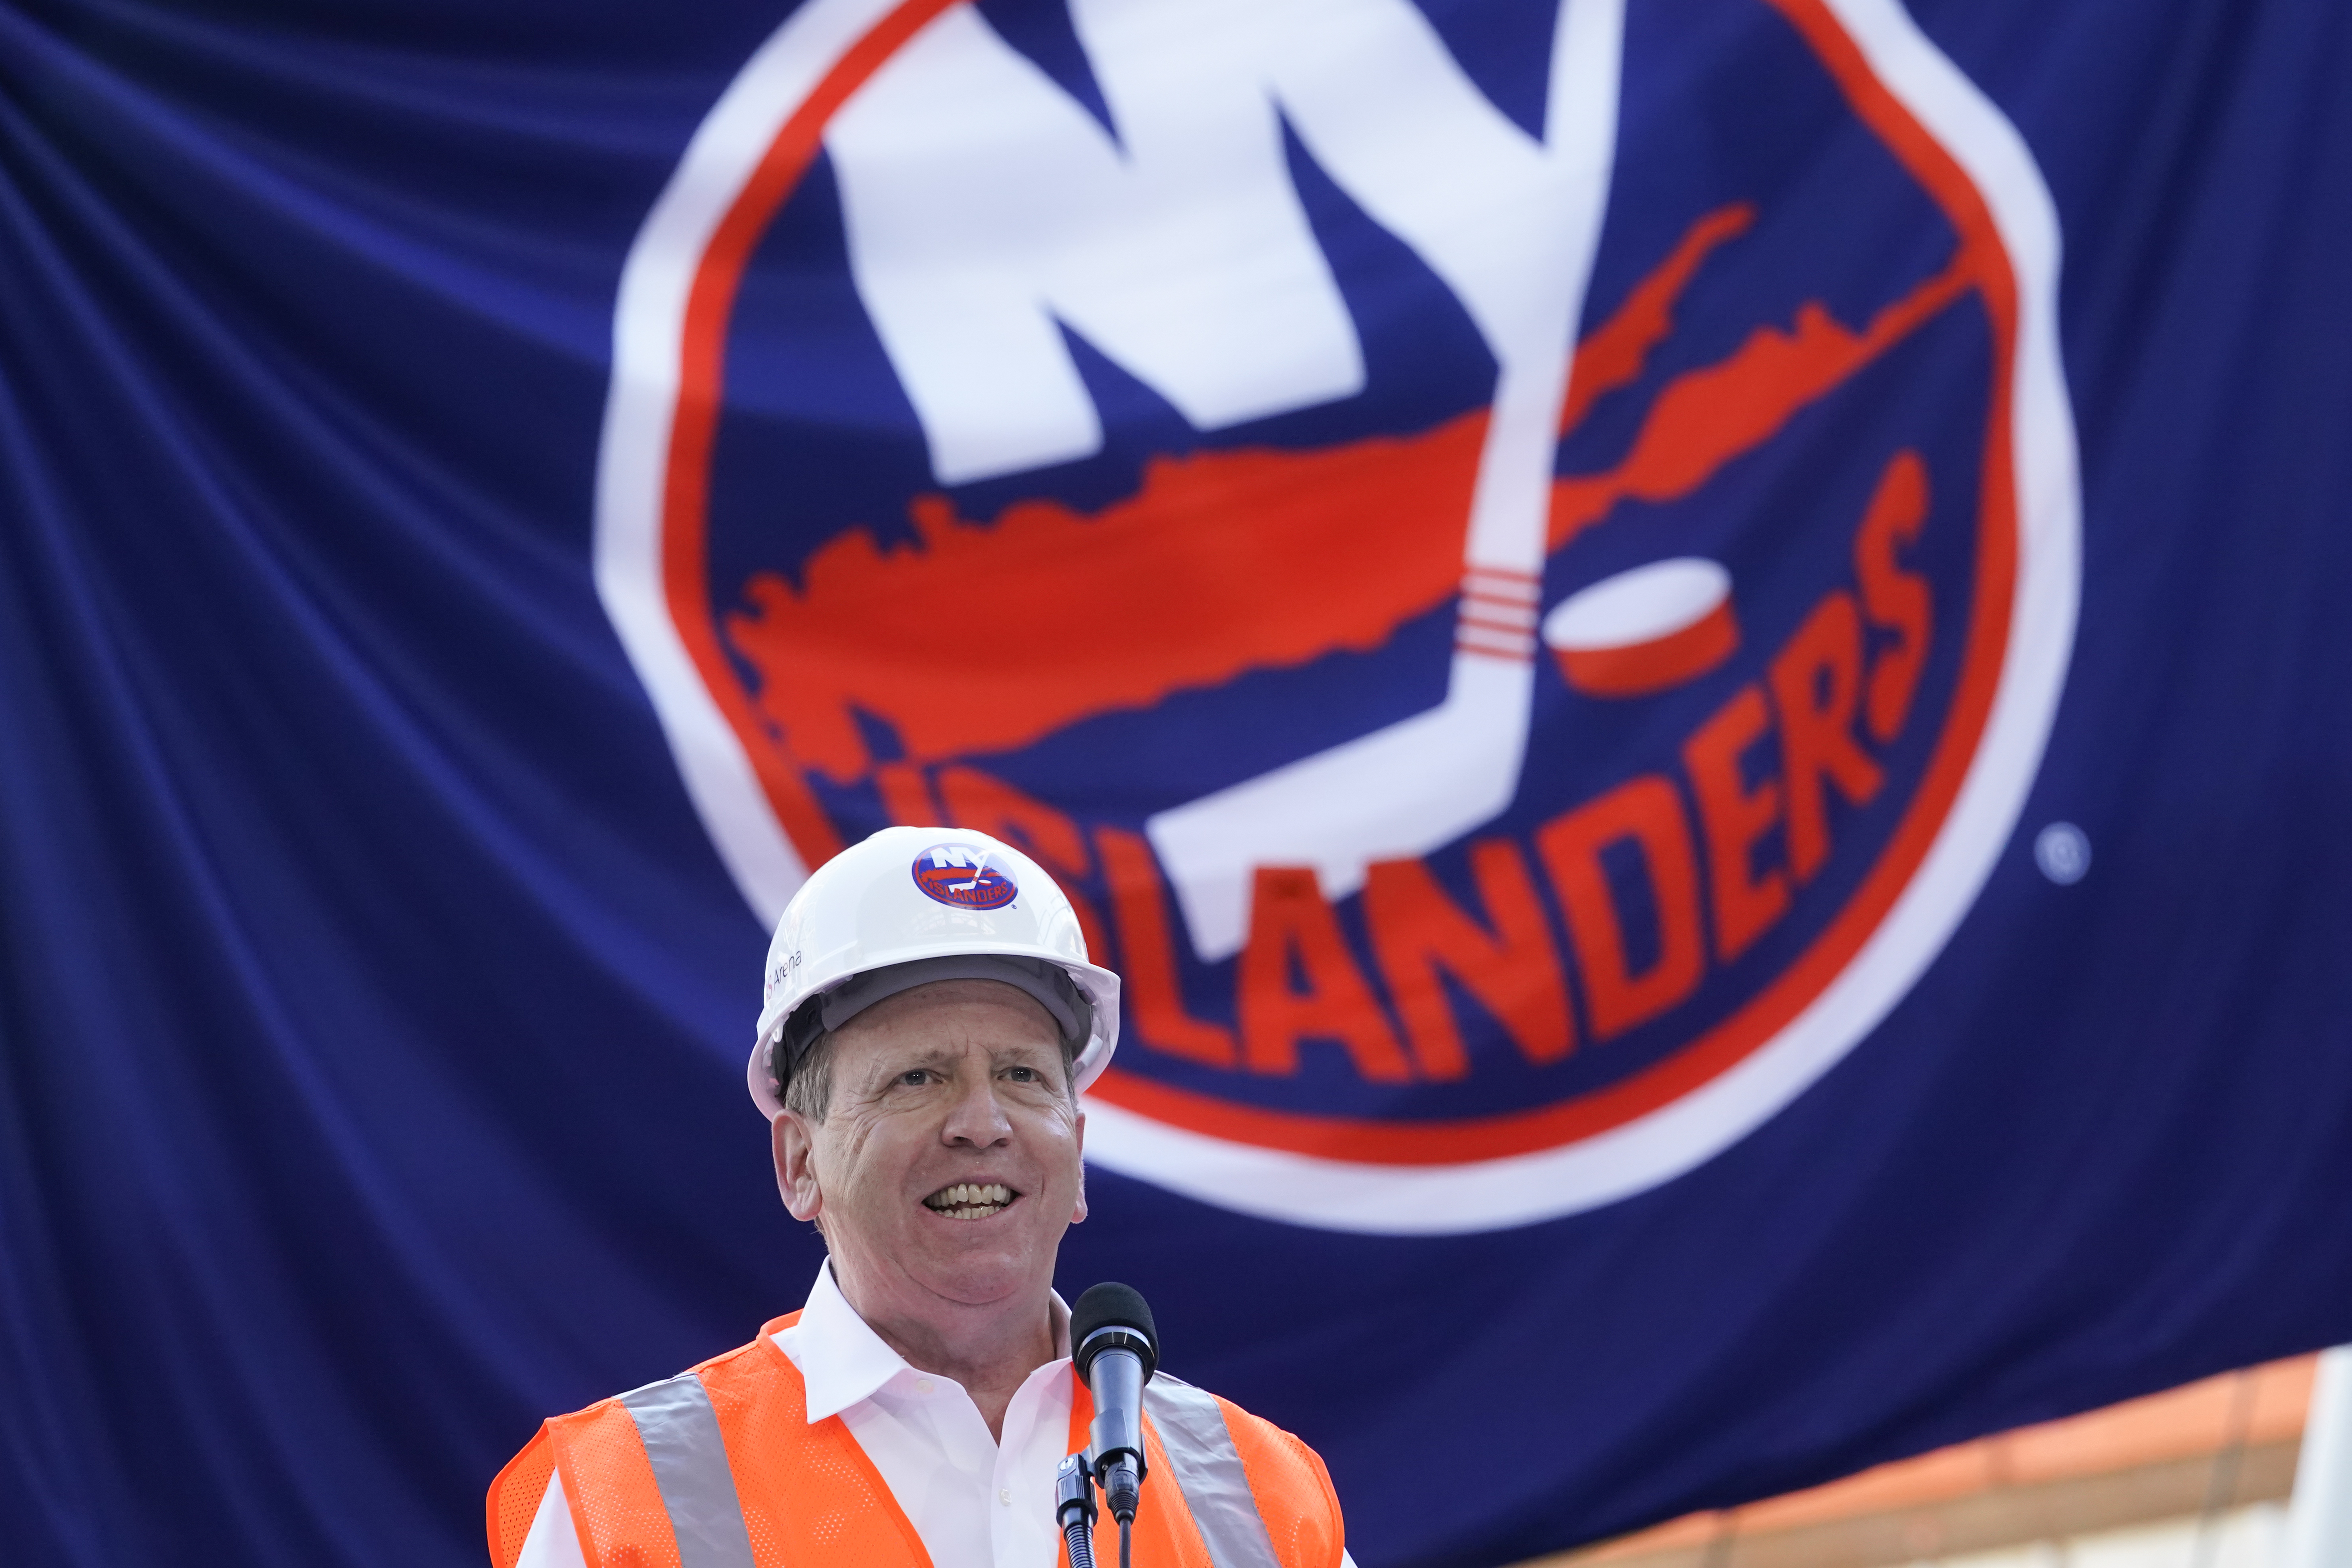 New arena season tickets sold out, Islanders announce